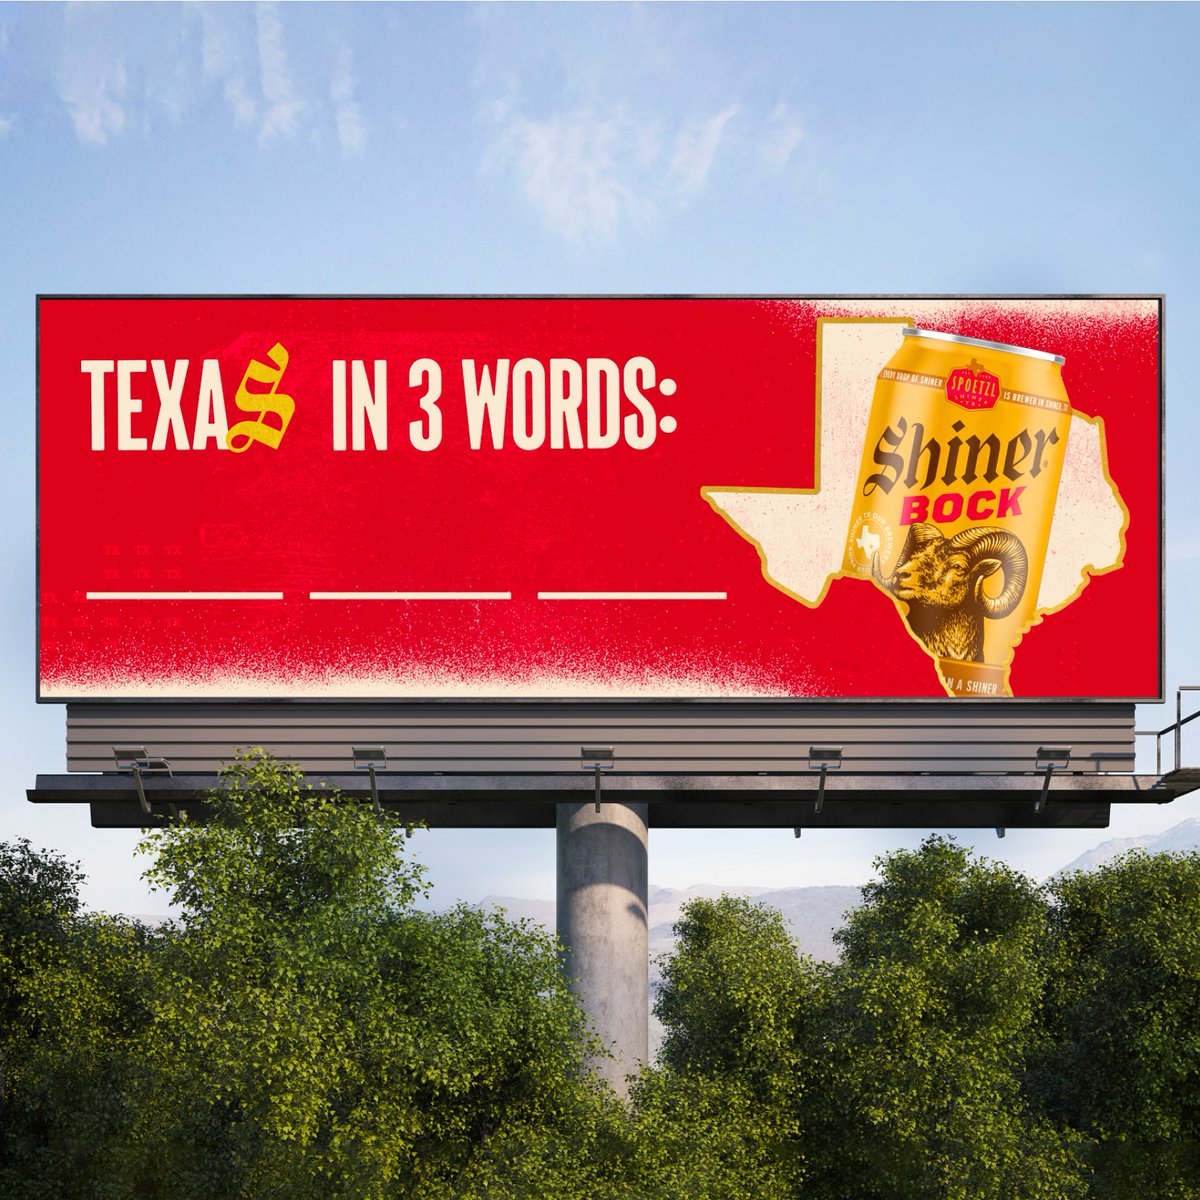 Never written a billboard before? Well, here’s your chance! Like this post, follow @ShinerBeer, and comment how you’d fill in the blank for a chance to get your line on a REAL Shiner billboard 🍺 #Giveaway #ShinerBeer #Shiner #TexasBeer #ShinerBock #ItsATexasThing